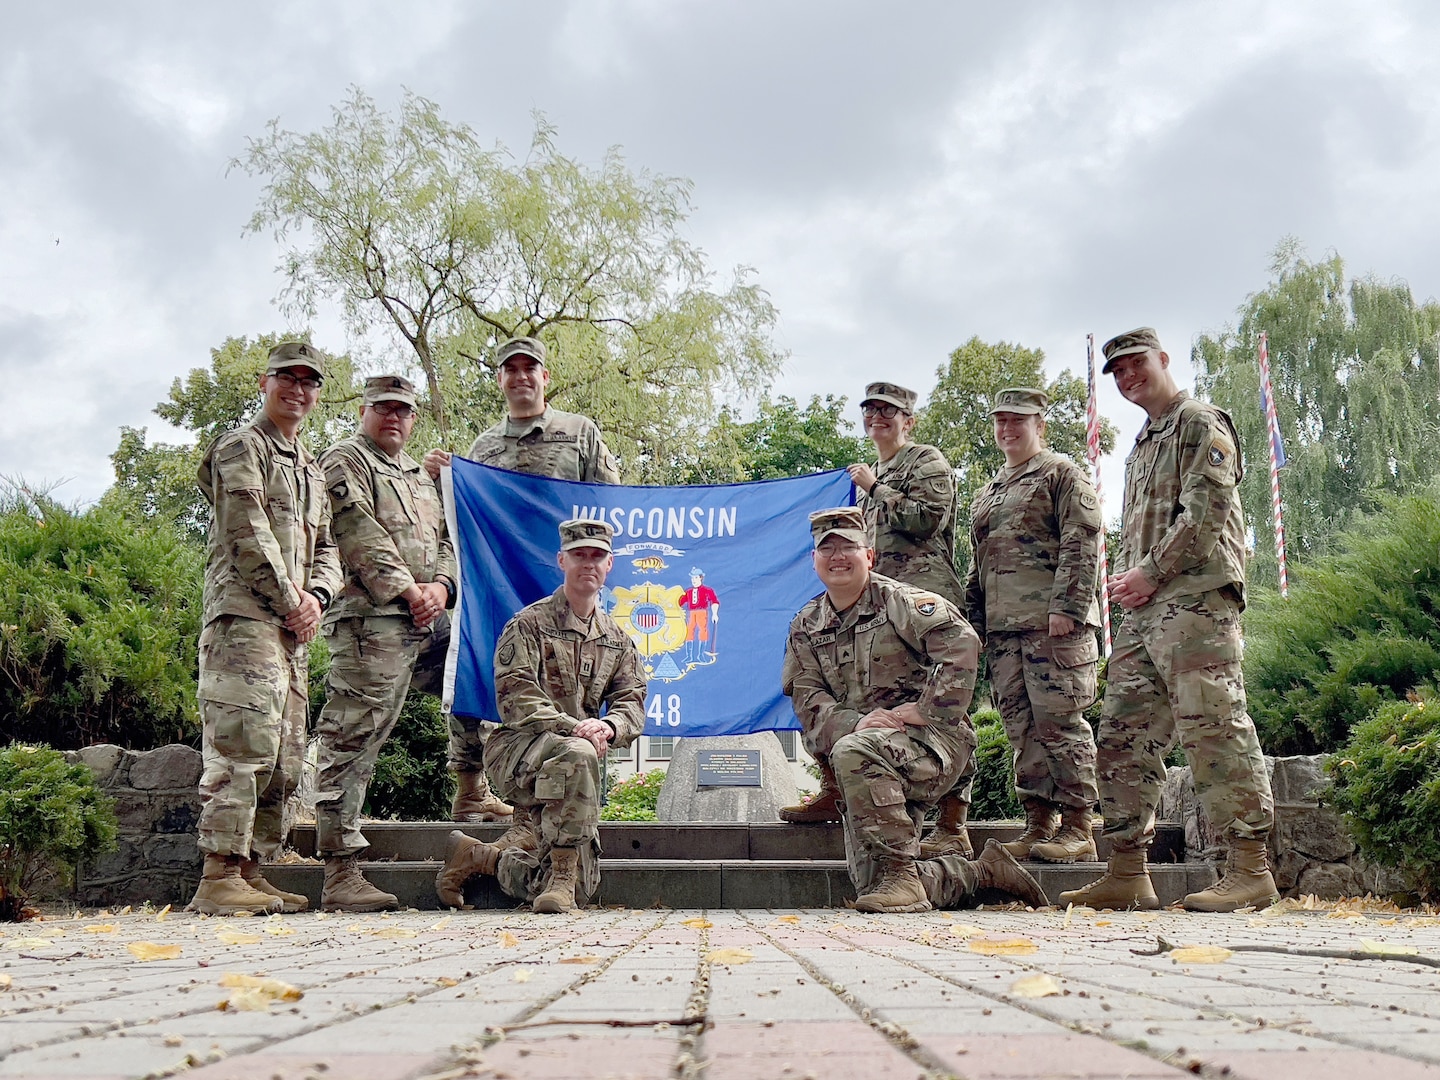 Eight members of the Wisconsin Army National Guard’s 112th Mobile Public Affairs Detachment left Wisconsin in May 2023 for a deployment to the Baltic region of Europe in support of Operation European Assure, Deter, Reinforce. Pictured are, left to right: Staff Sgt. Oscar Gollaz, Capt. H. Howey, unit commander Maj. Joe Trovato, Capt. Daniel Yarnall, Sgt. Cesar Salazar Jr, 1st Sgt. Alexandria Hughes, Sgt. 1st Class Bridget Vian and Sgt. Alex Soliday. 112t Mobile Public Affairs Detachment photo